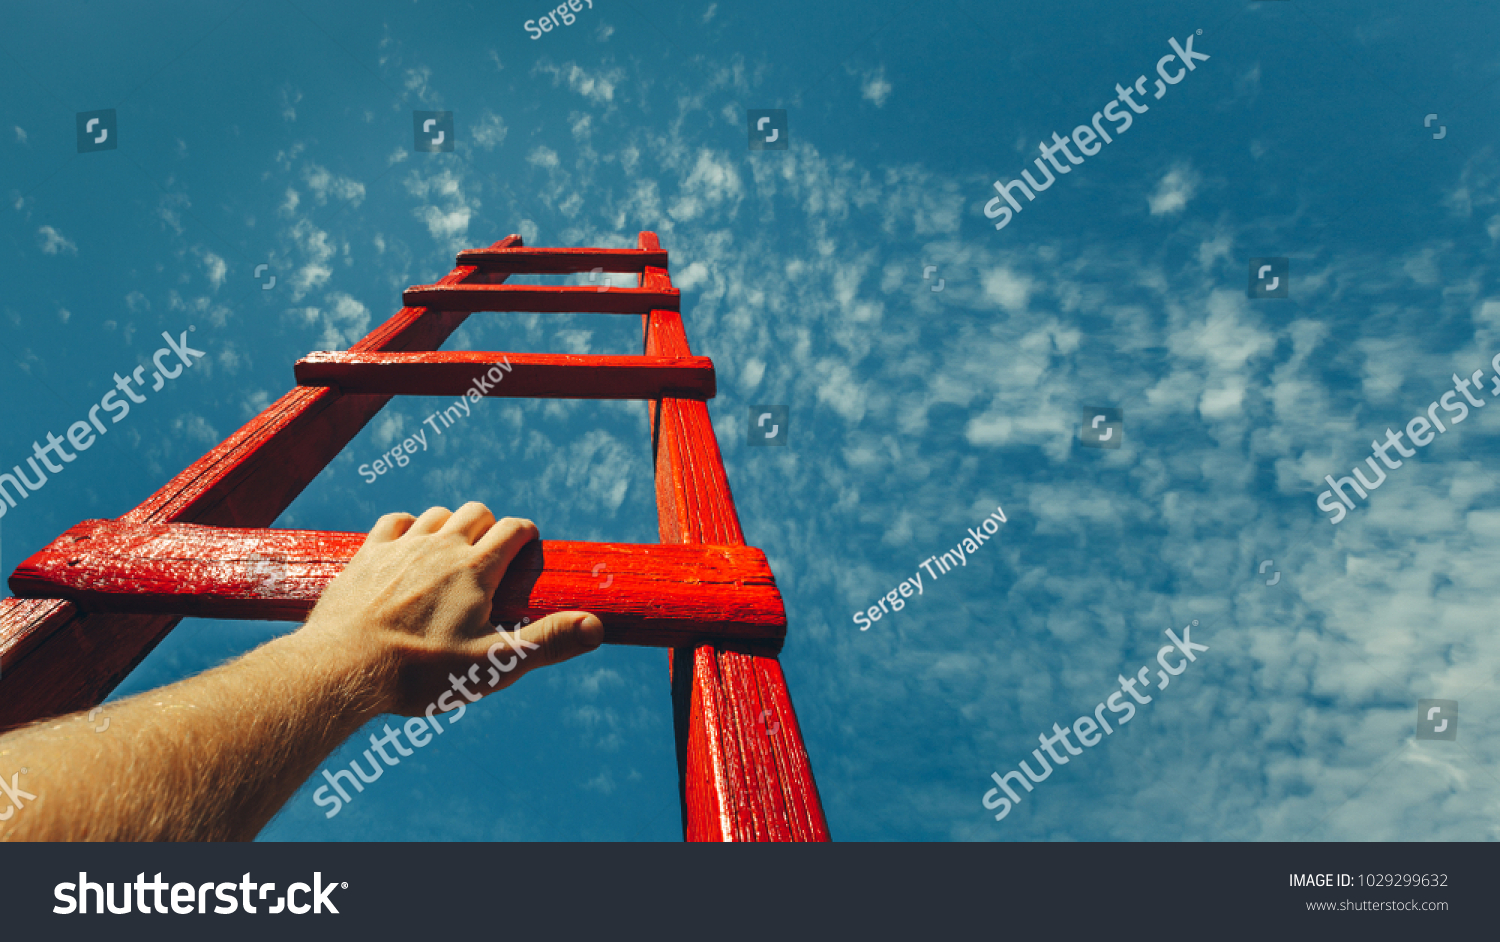 Development Attainment Motivation Career Growth Concept. Mans Hand Reaching For Red Ladder Leading To A Blue Sky #1029299632